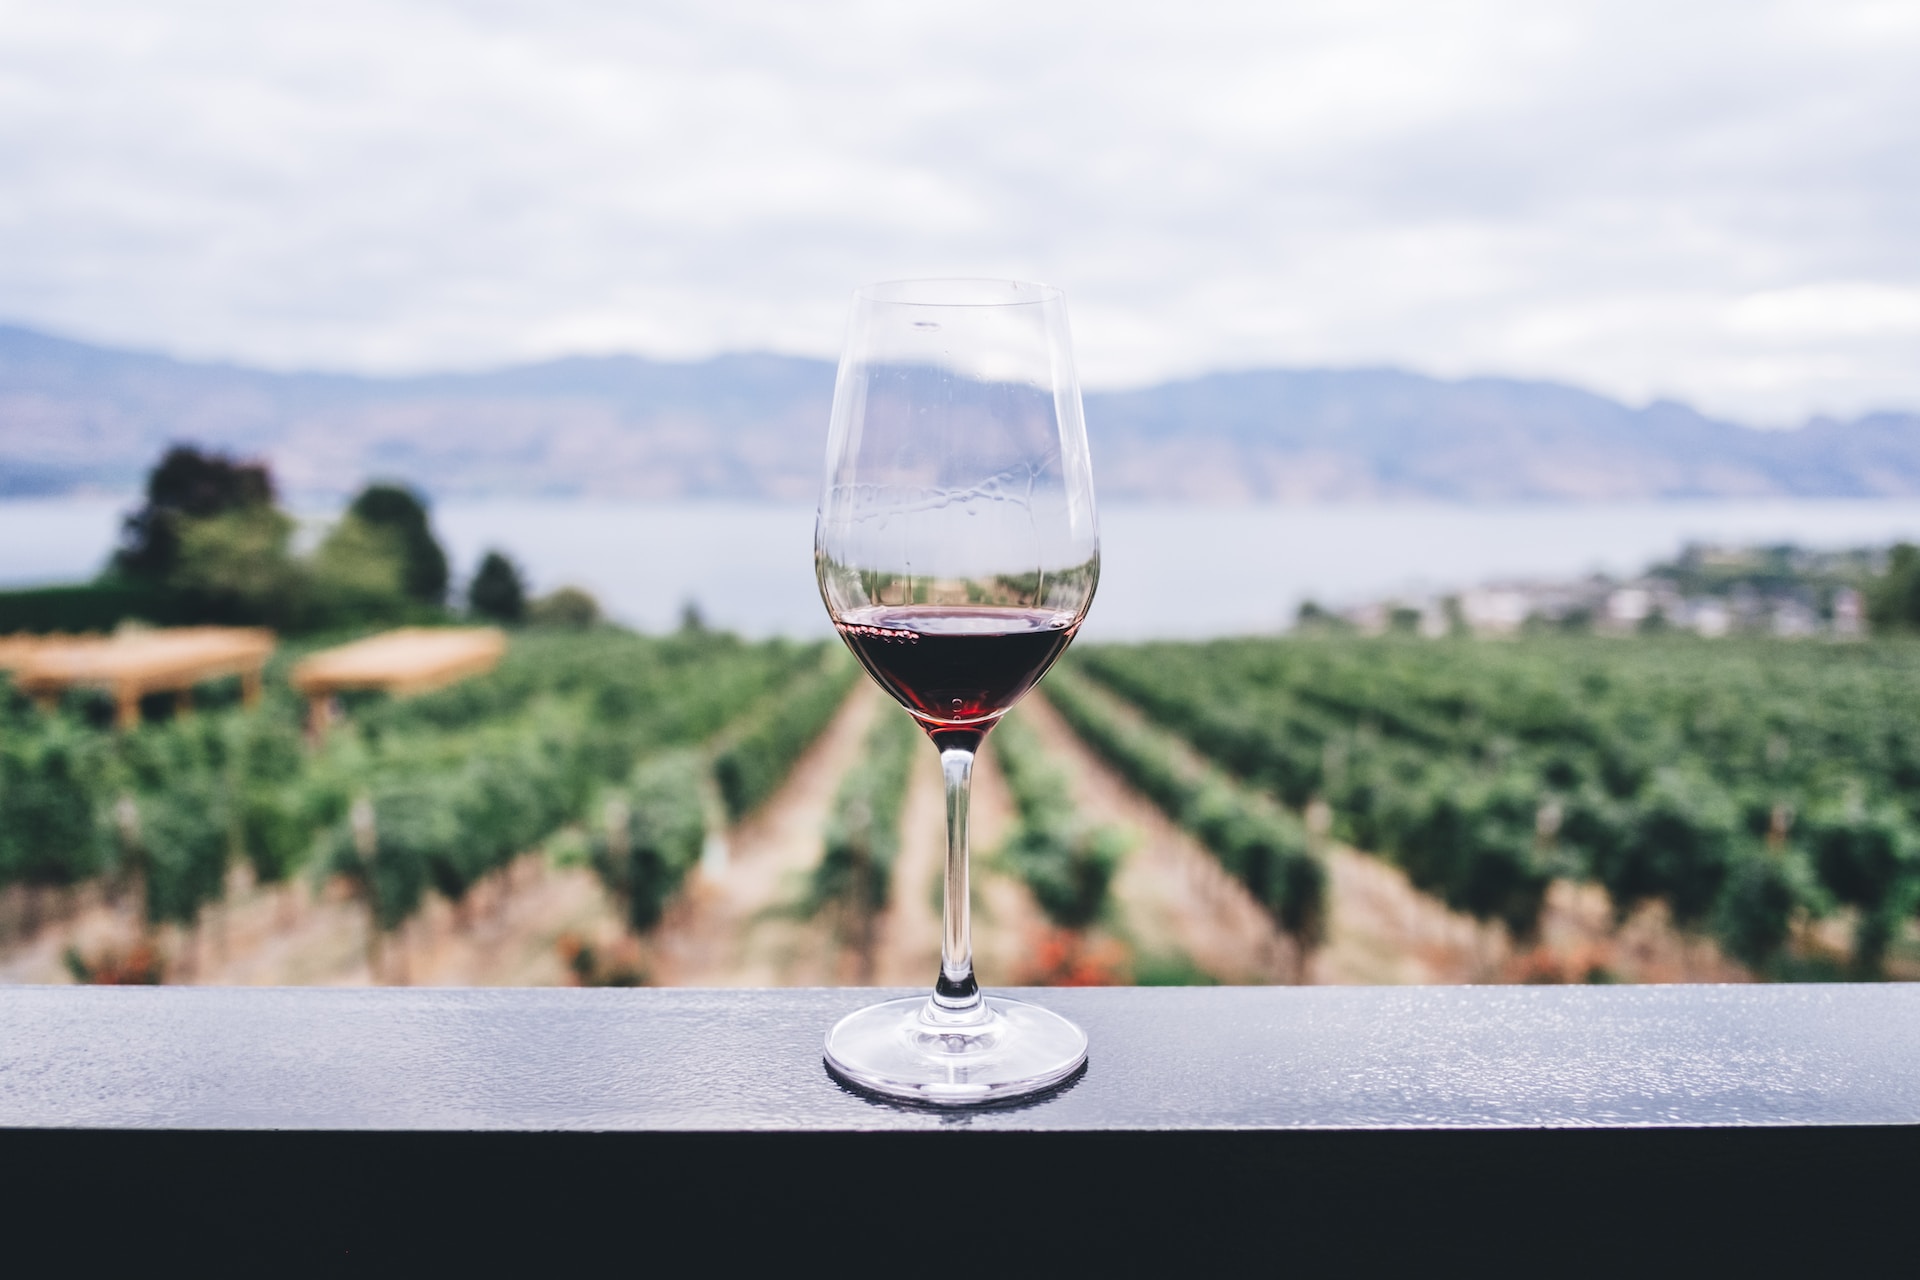 A wine glass on a ledge overlooking vineyards.